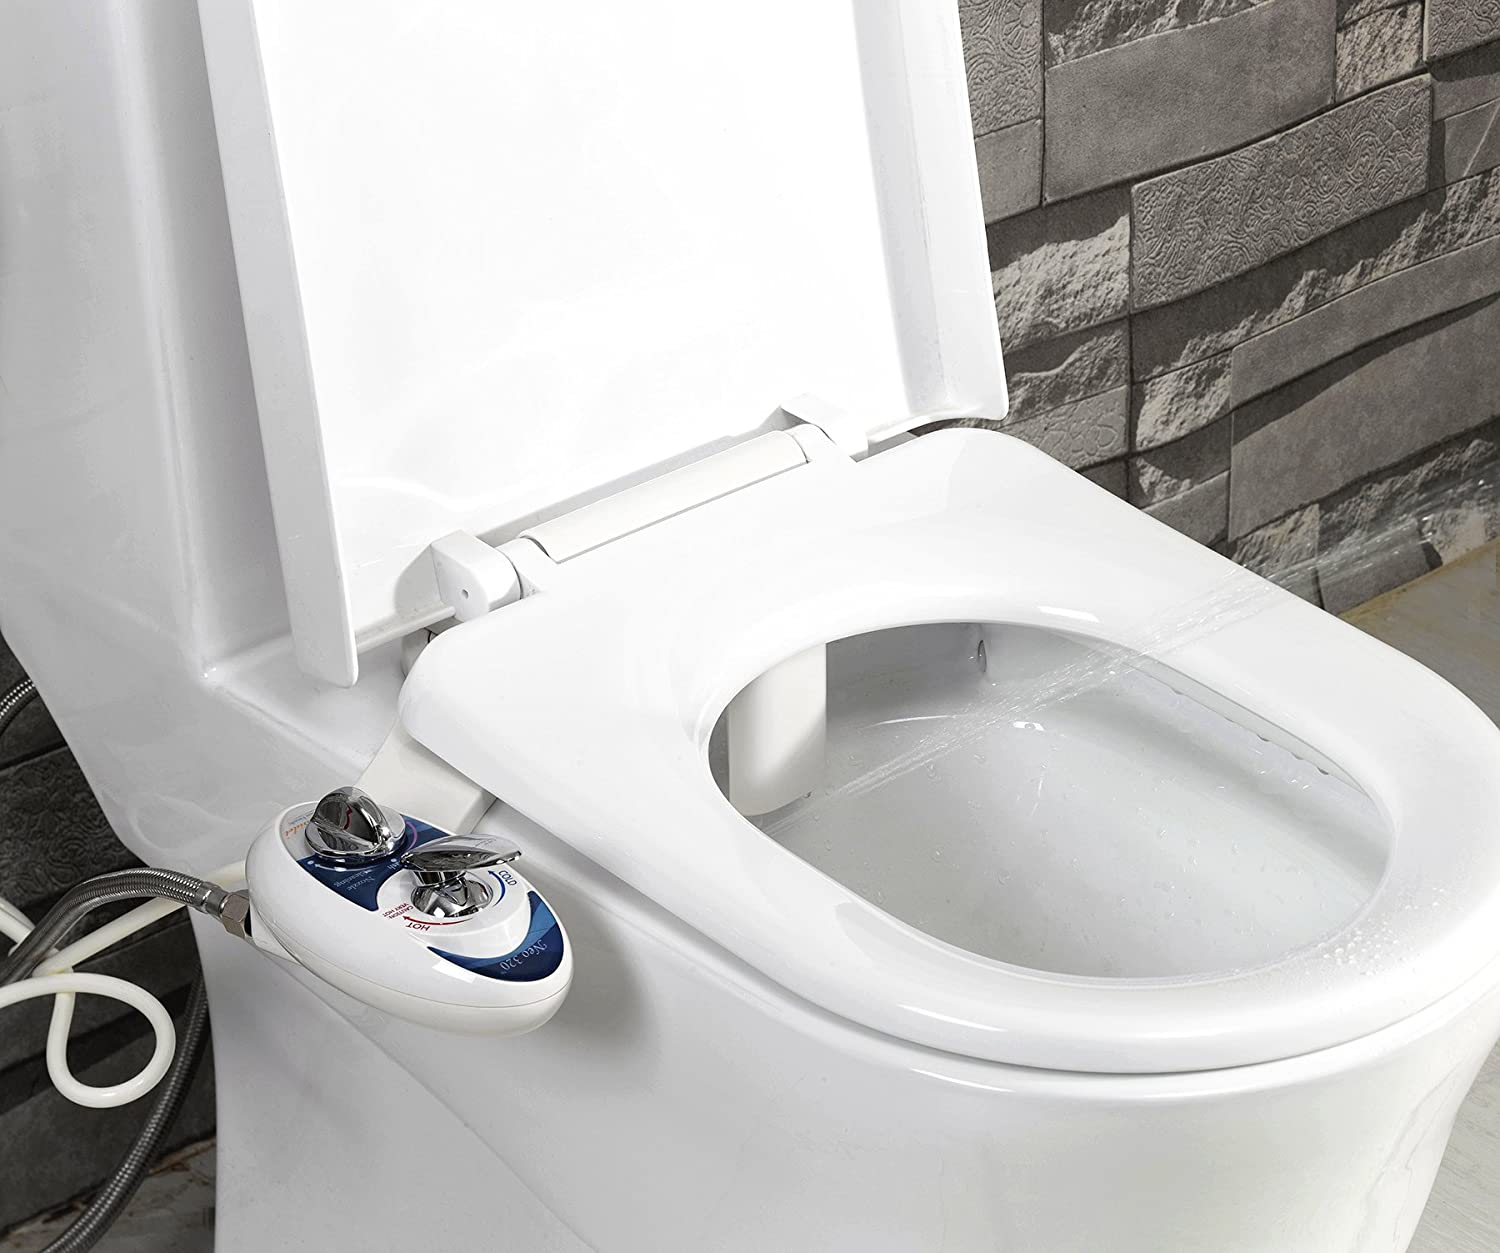 The Best Heated Toilet Seat Options